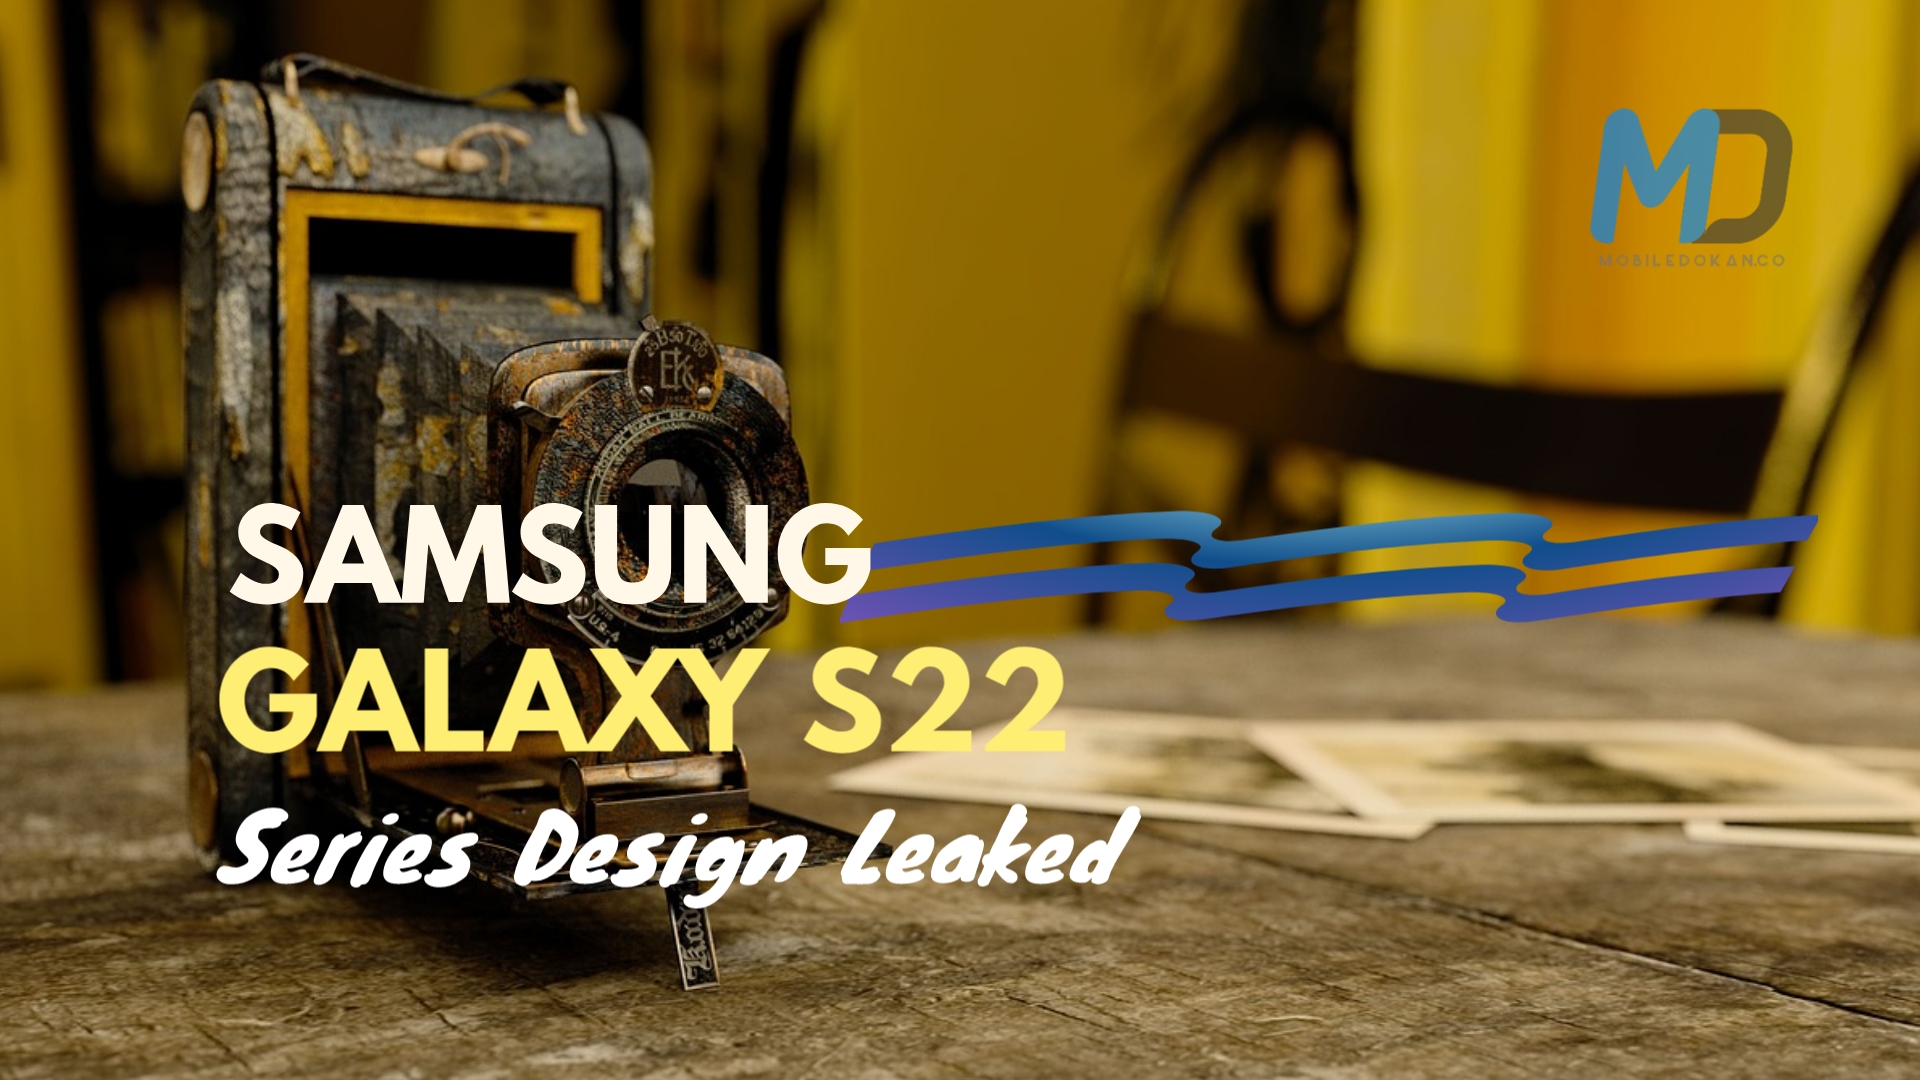 Samsung Galaxy S22 series leaked the design